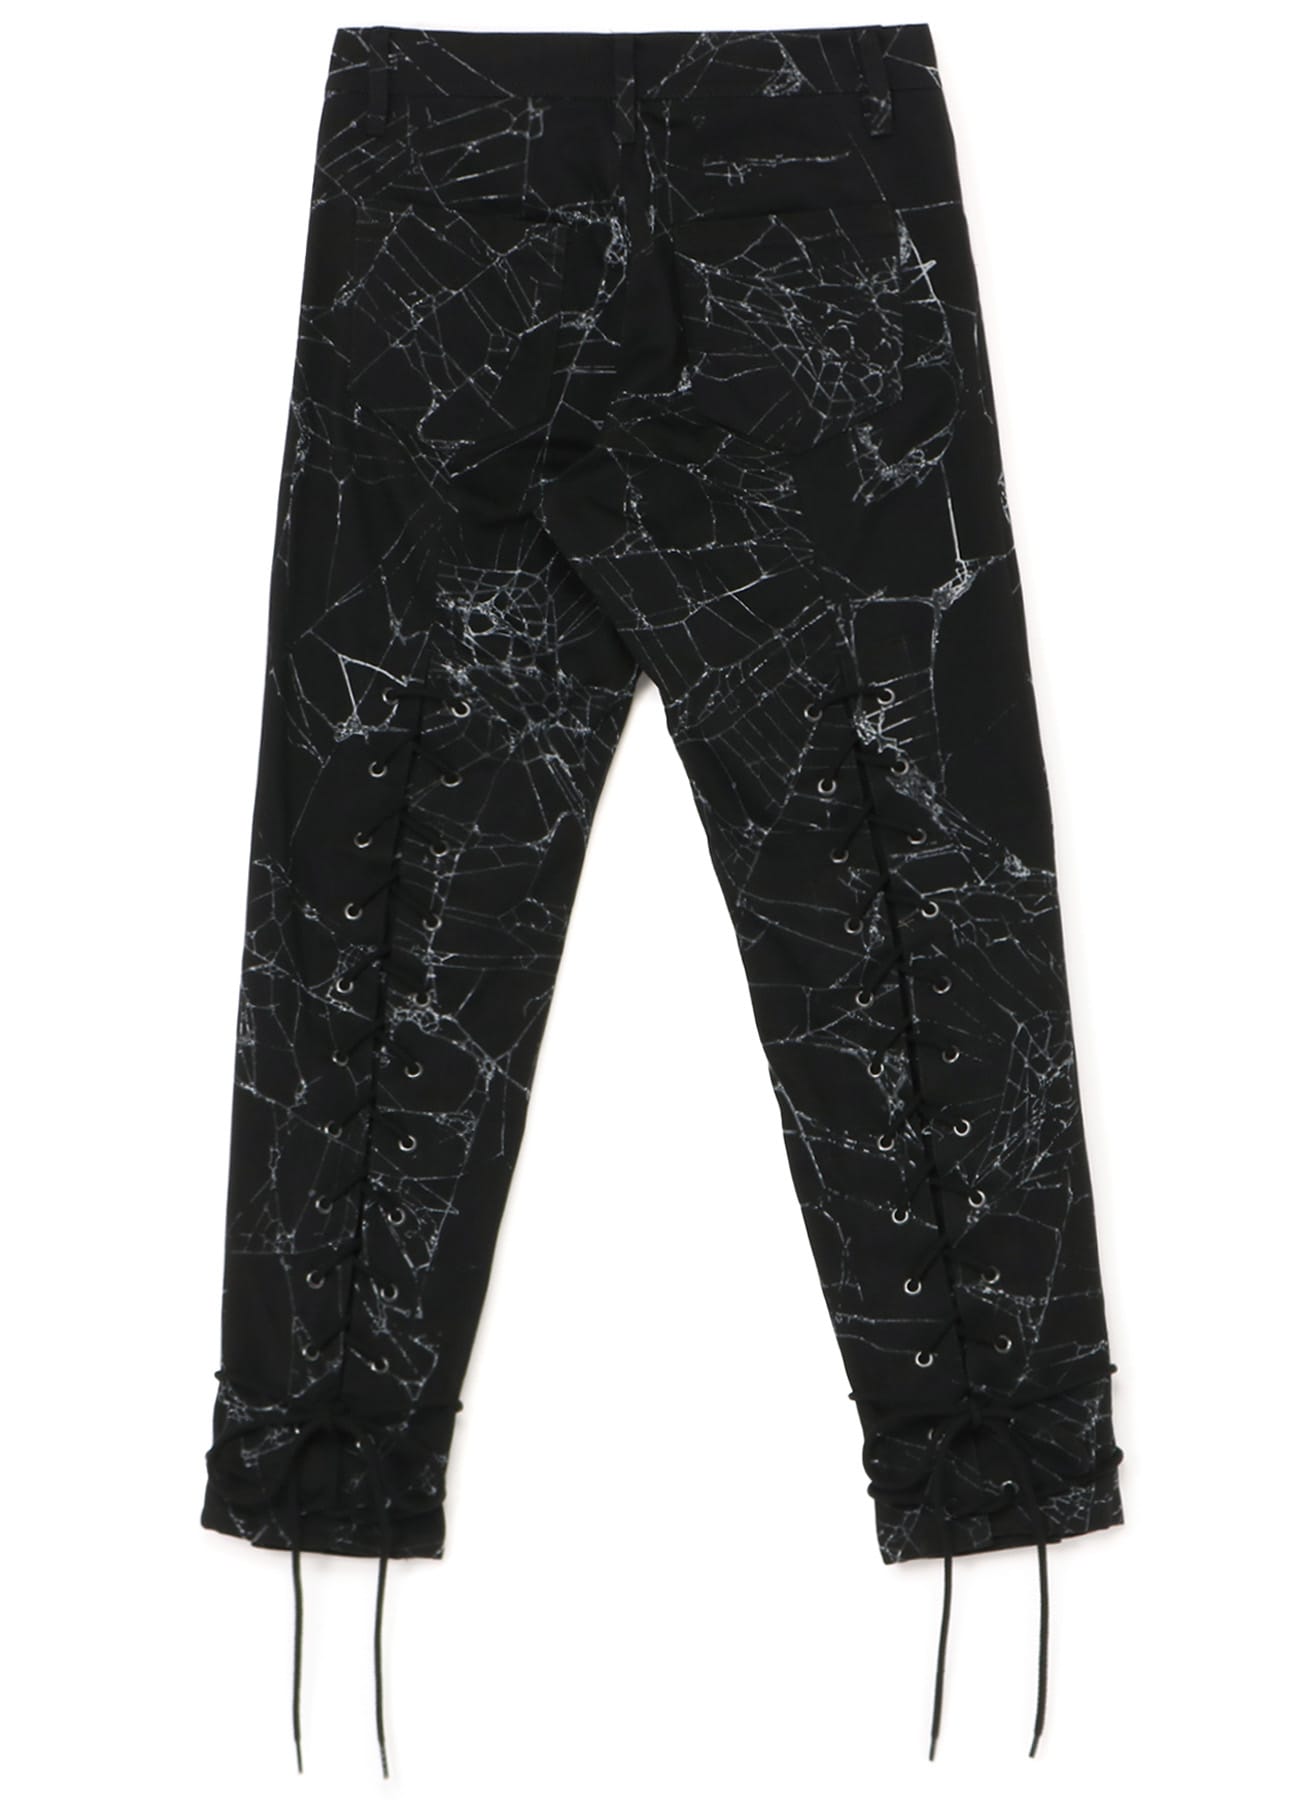 Spider Drill Back Lace Up Pants